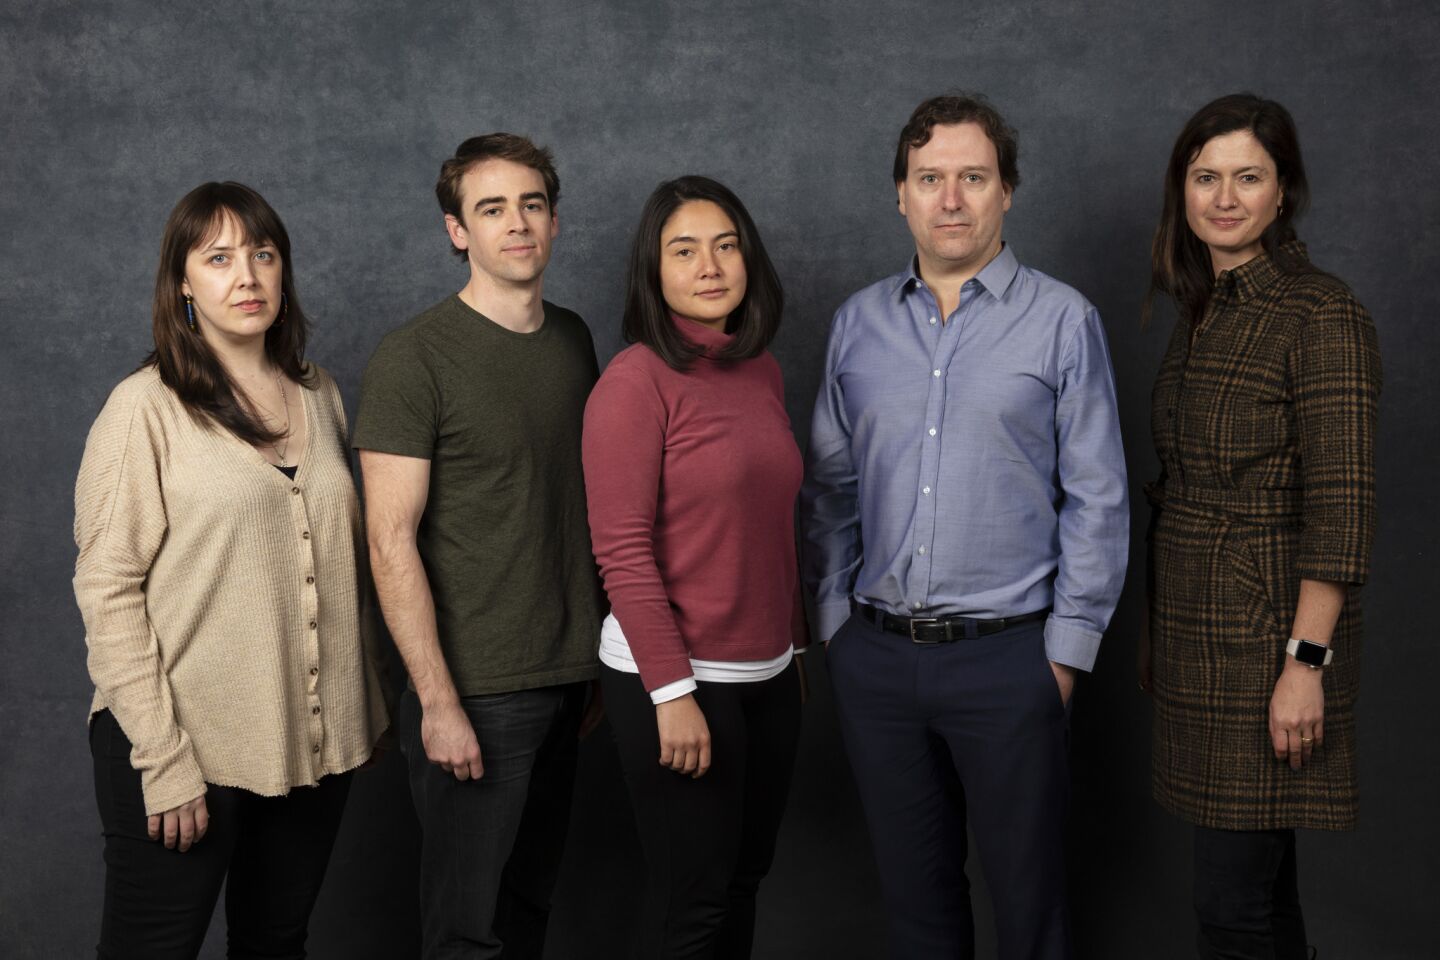 Producer Erin Edeiken, subjects Tyler Shultz, Erika Cheung and John Carreyrou, and producer Jessie Deeter from the documentary "The Inventor: Out for Blood in Silicon Valley."